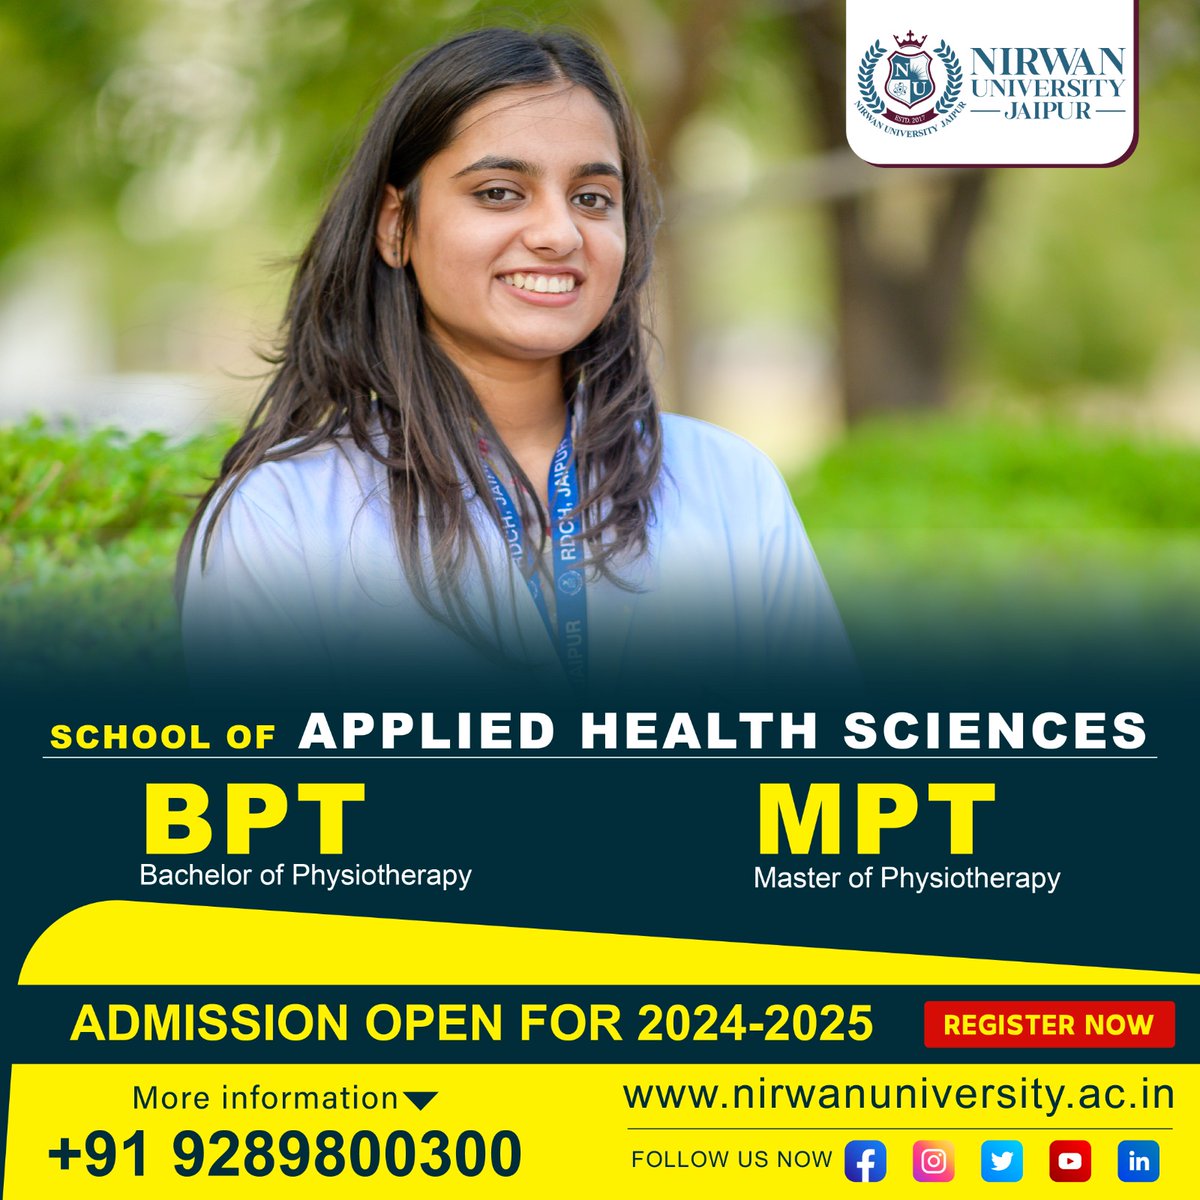 Ready to take the first step towards a fulfilling career in health sciences? #NirwanUniversity Jaipur School of Applied #HealthSciences is thrilled to announce #admissions for #BPT and #MPT programs for the #academic year 2024-25.